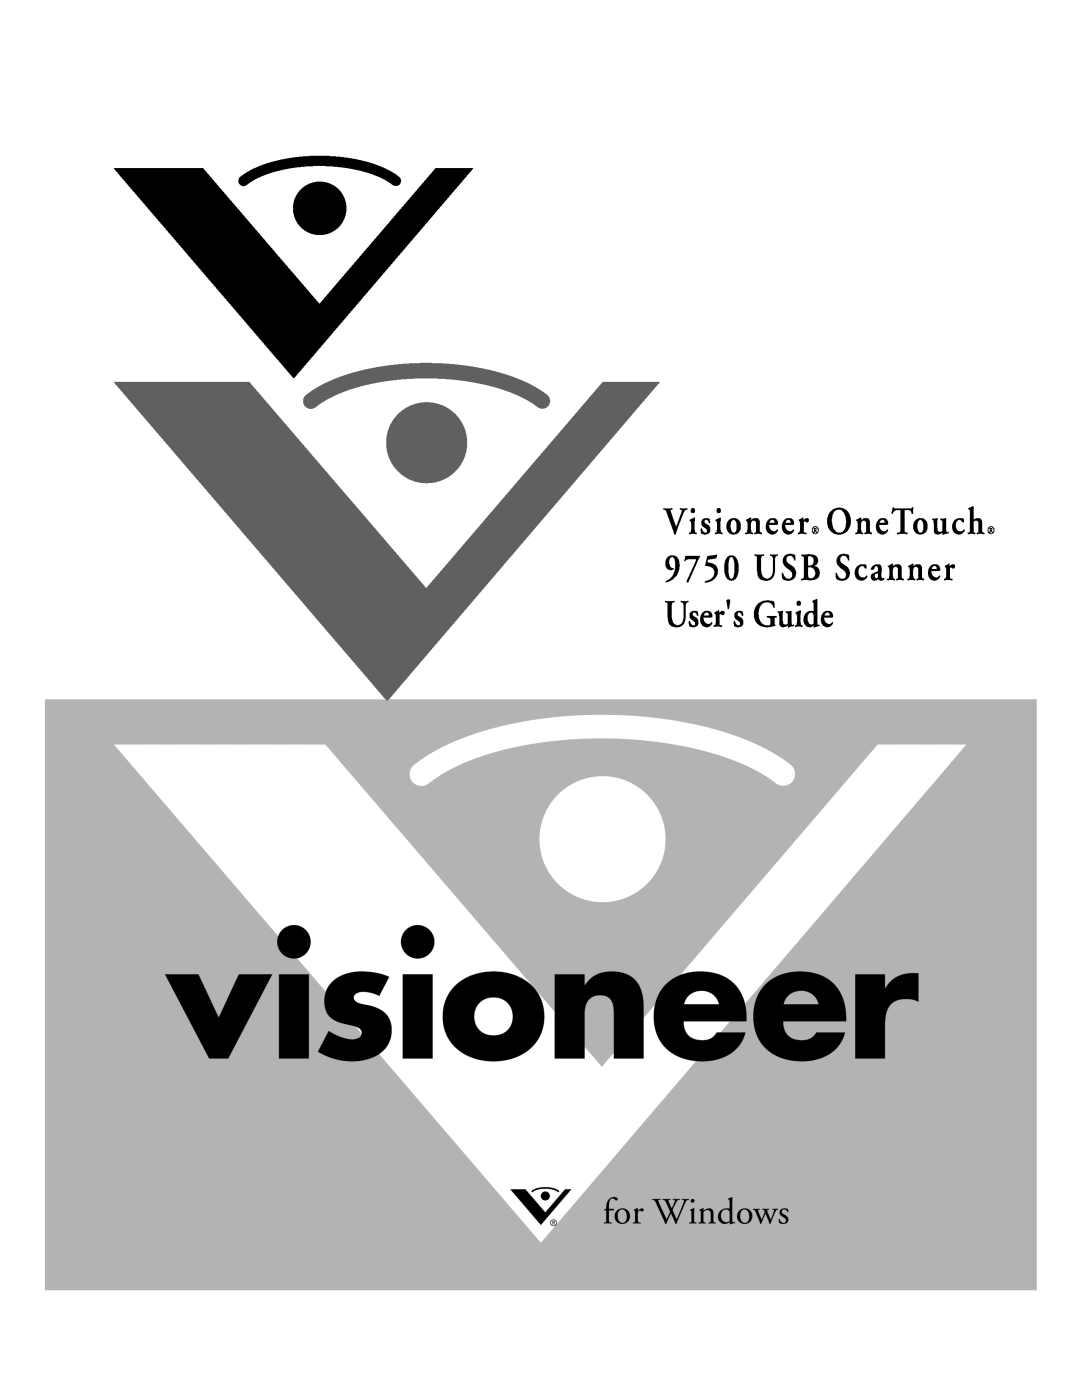 Visioneer manual Visioneer OneTouch 9750 USB Scanner Users Guide, for Windows 